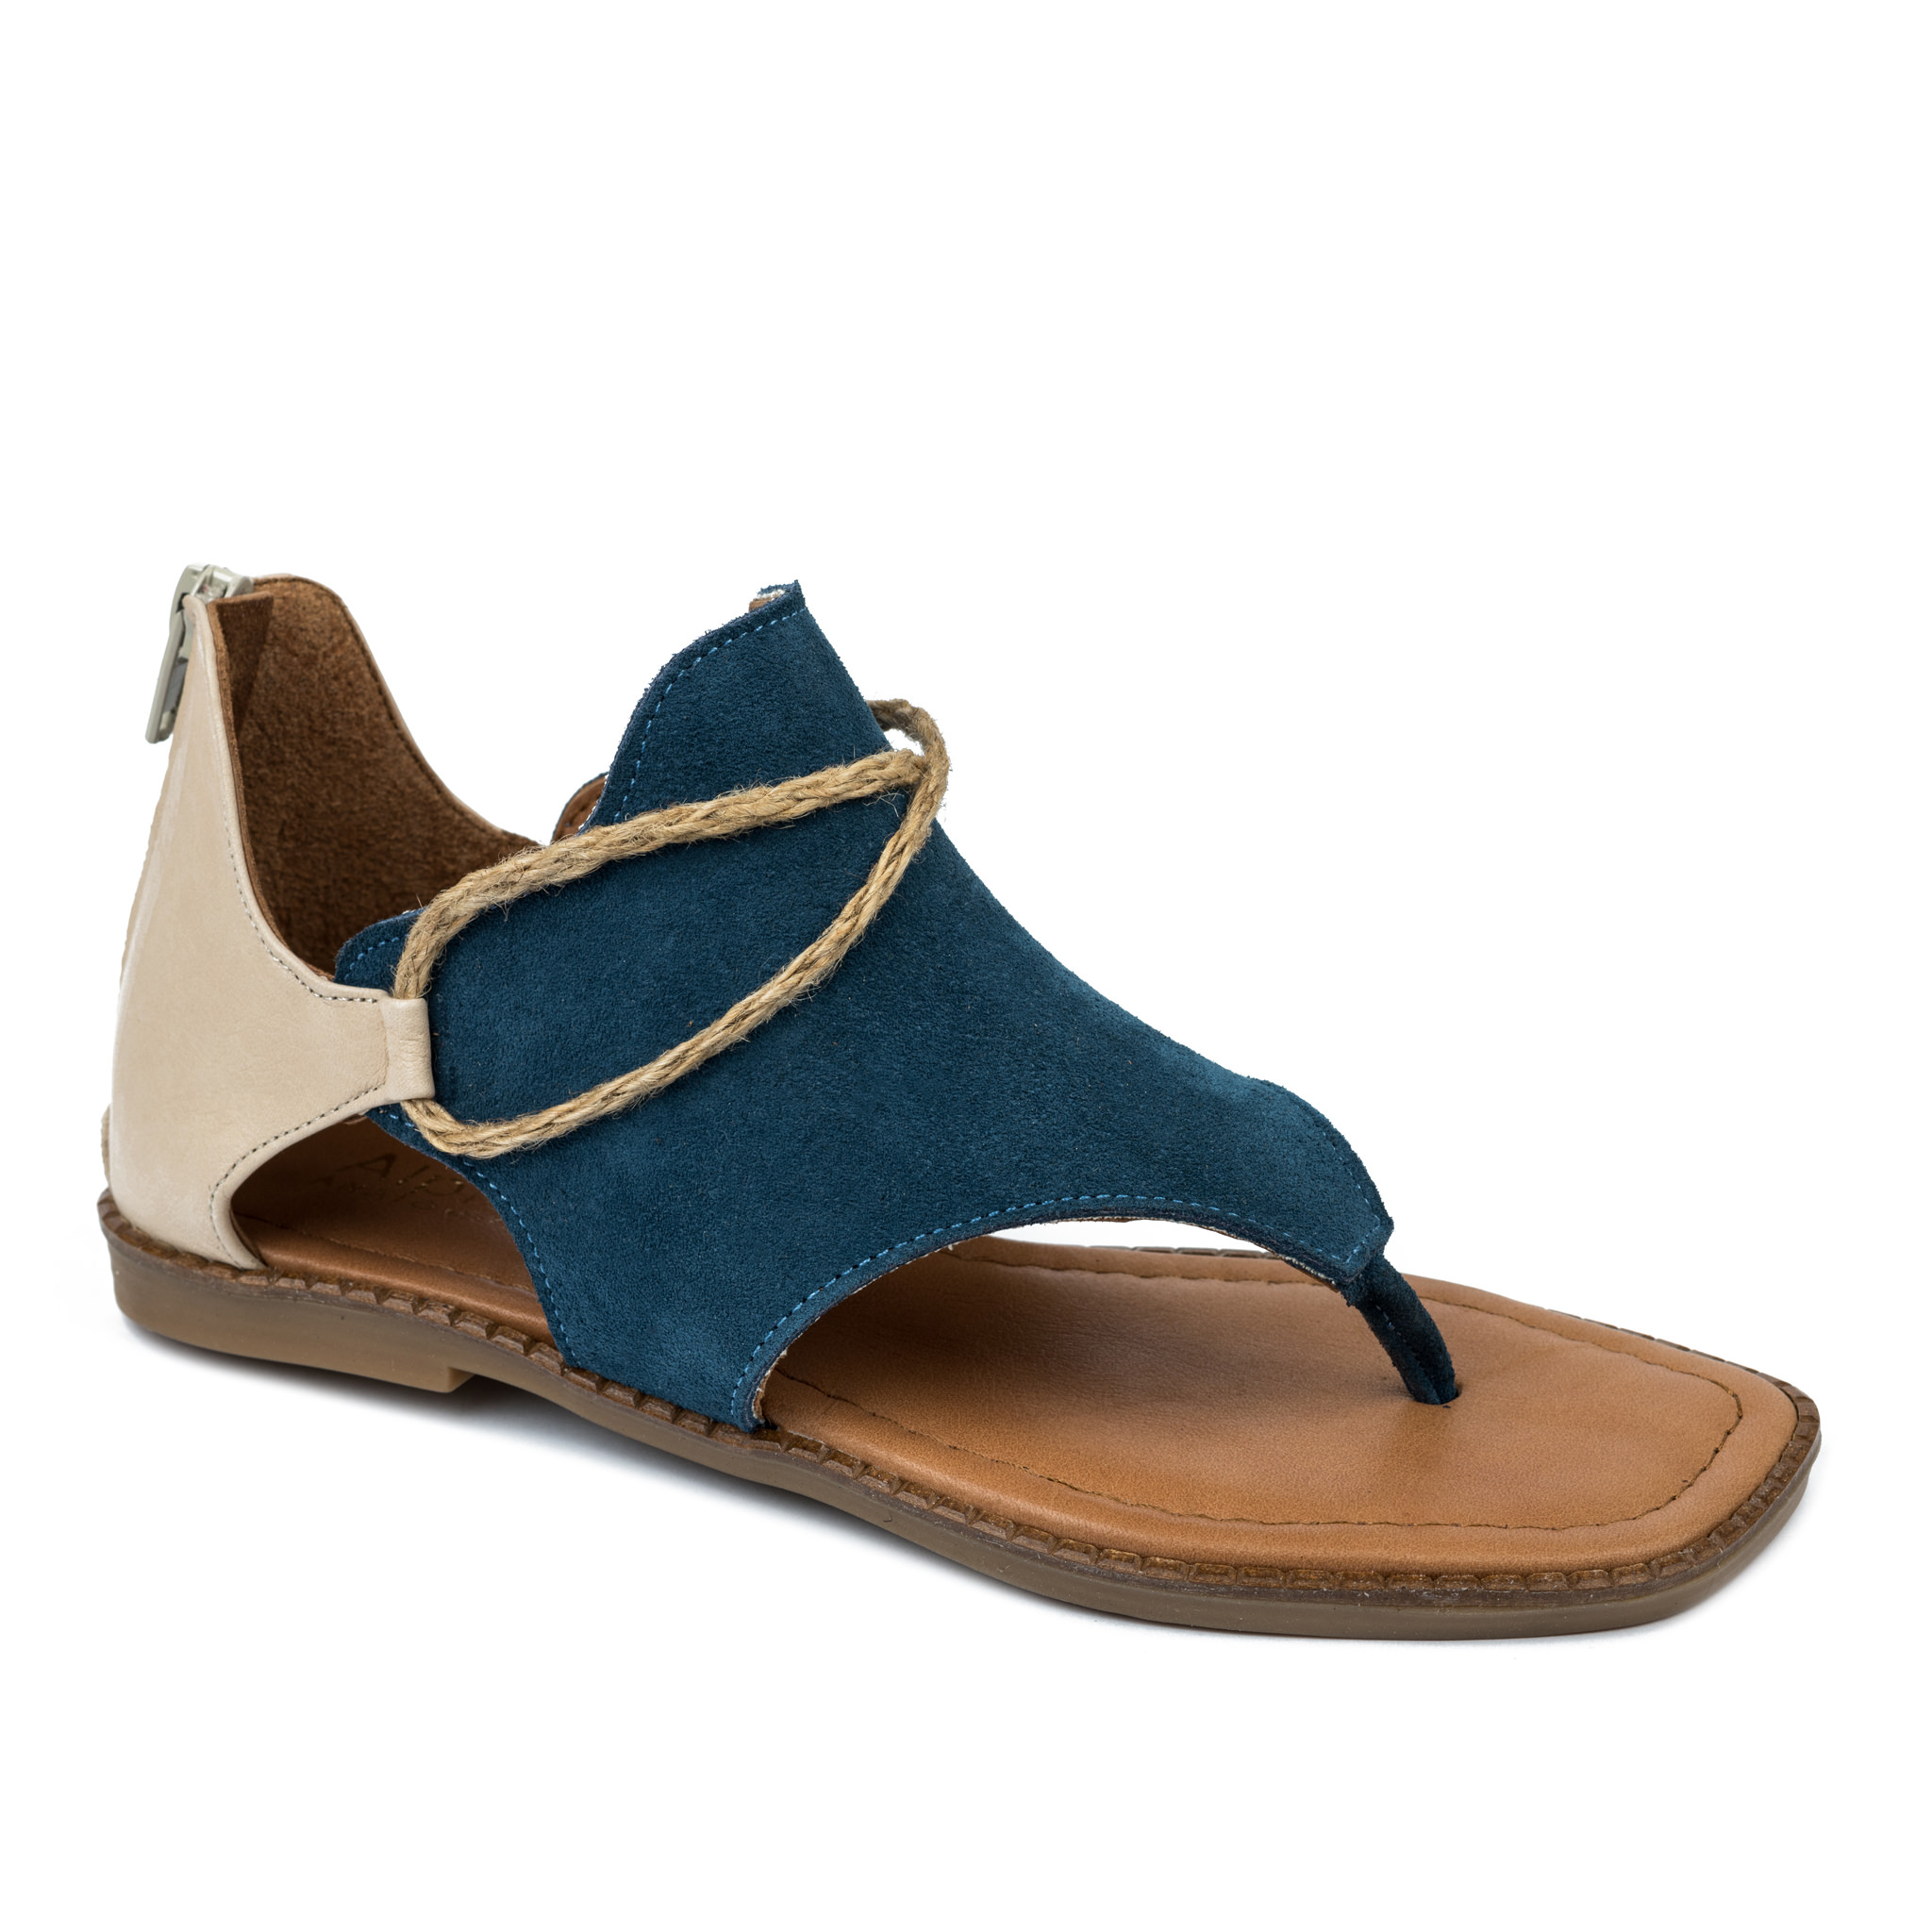 Leather sandals A643 - NAVY